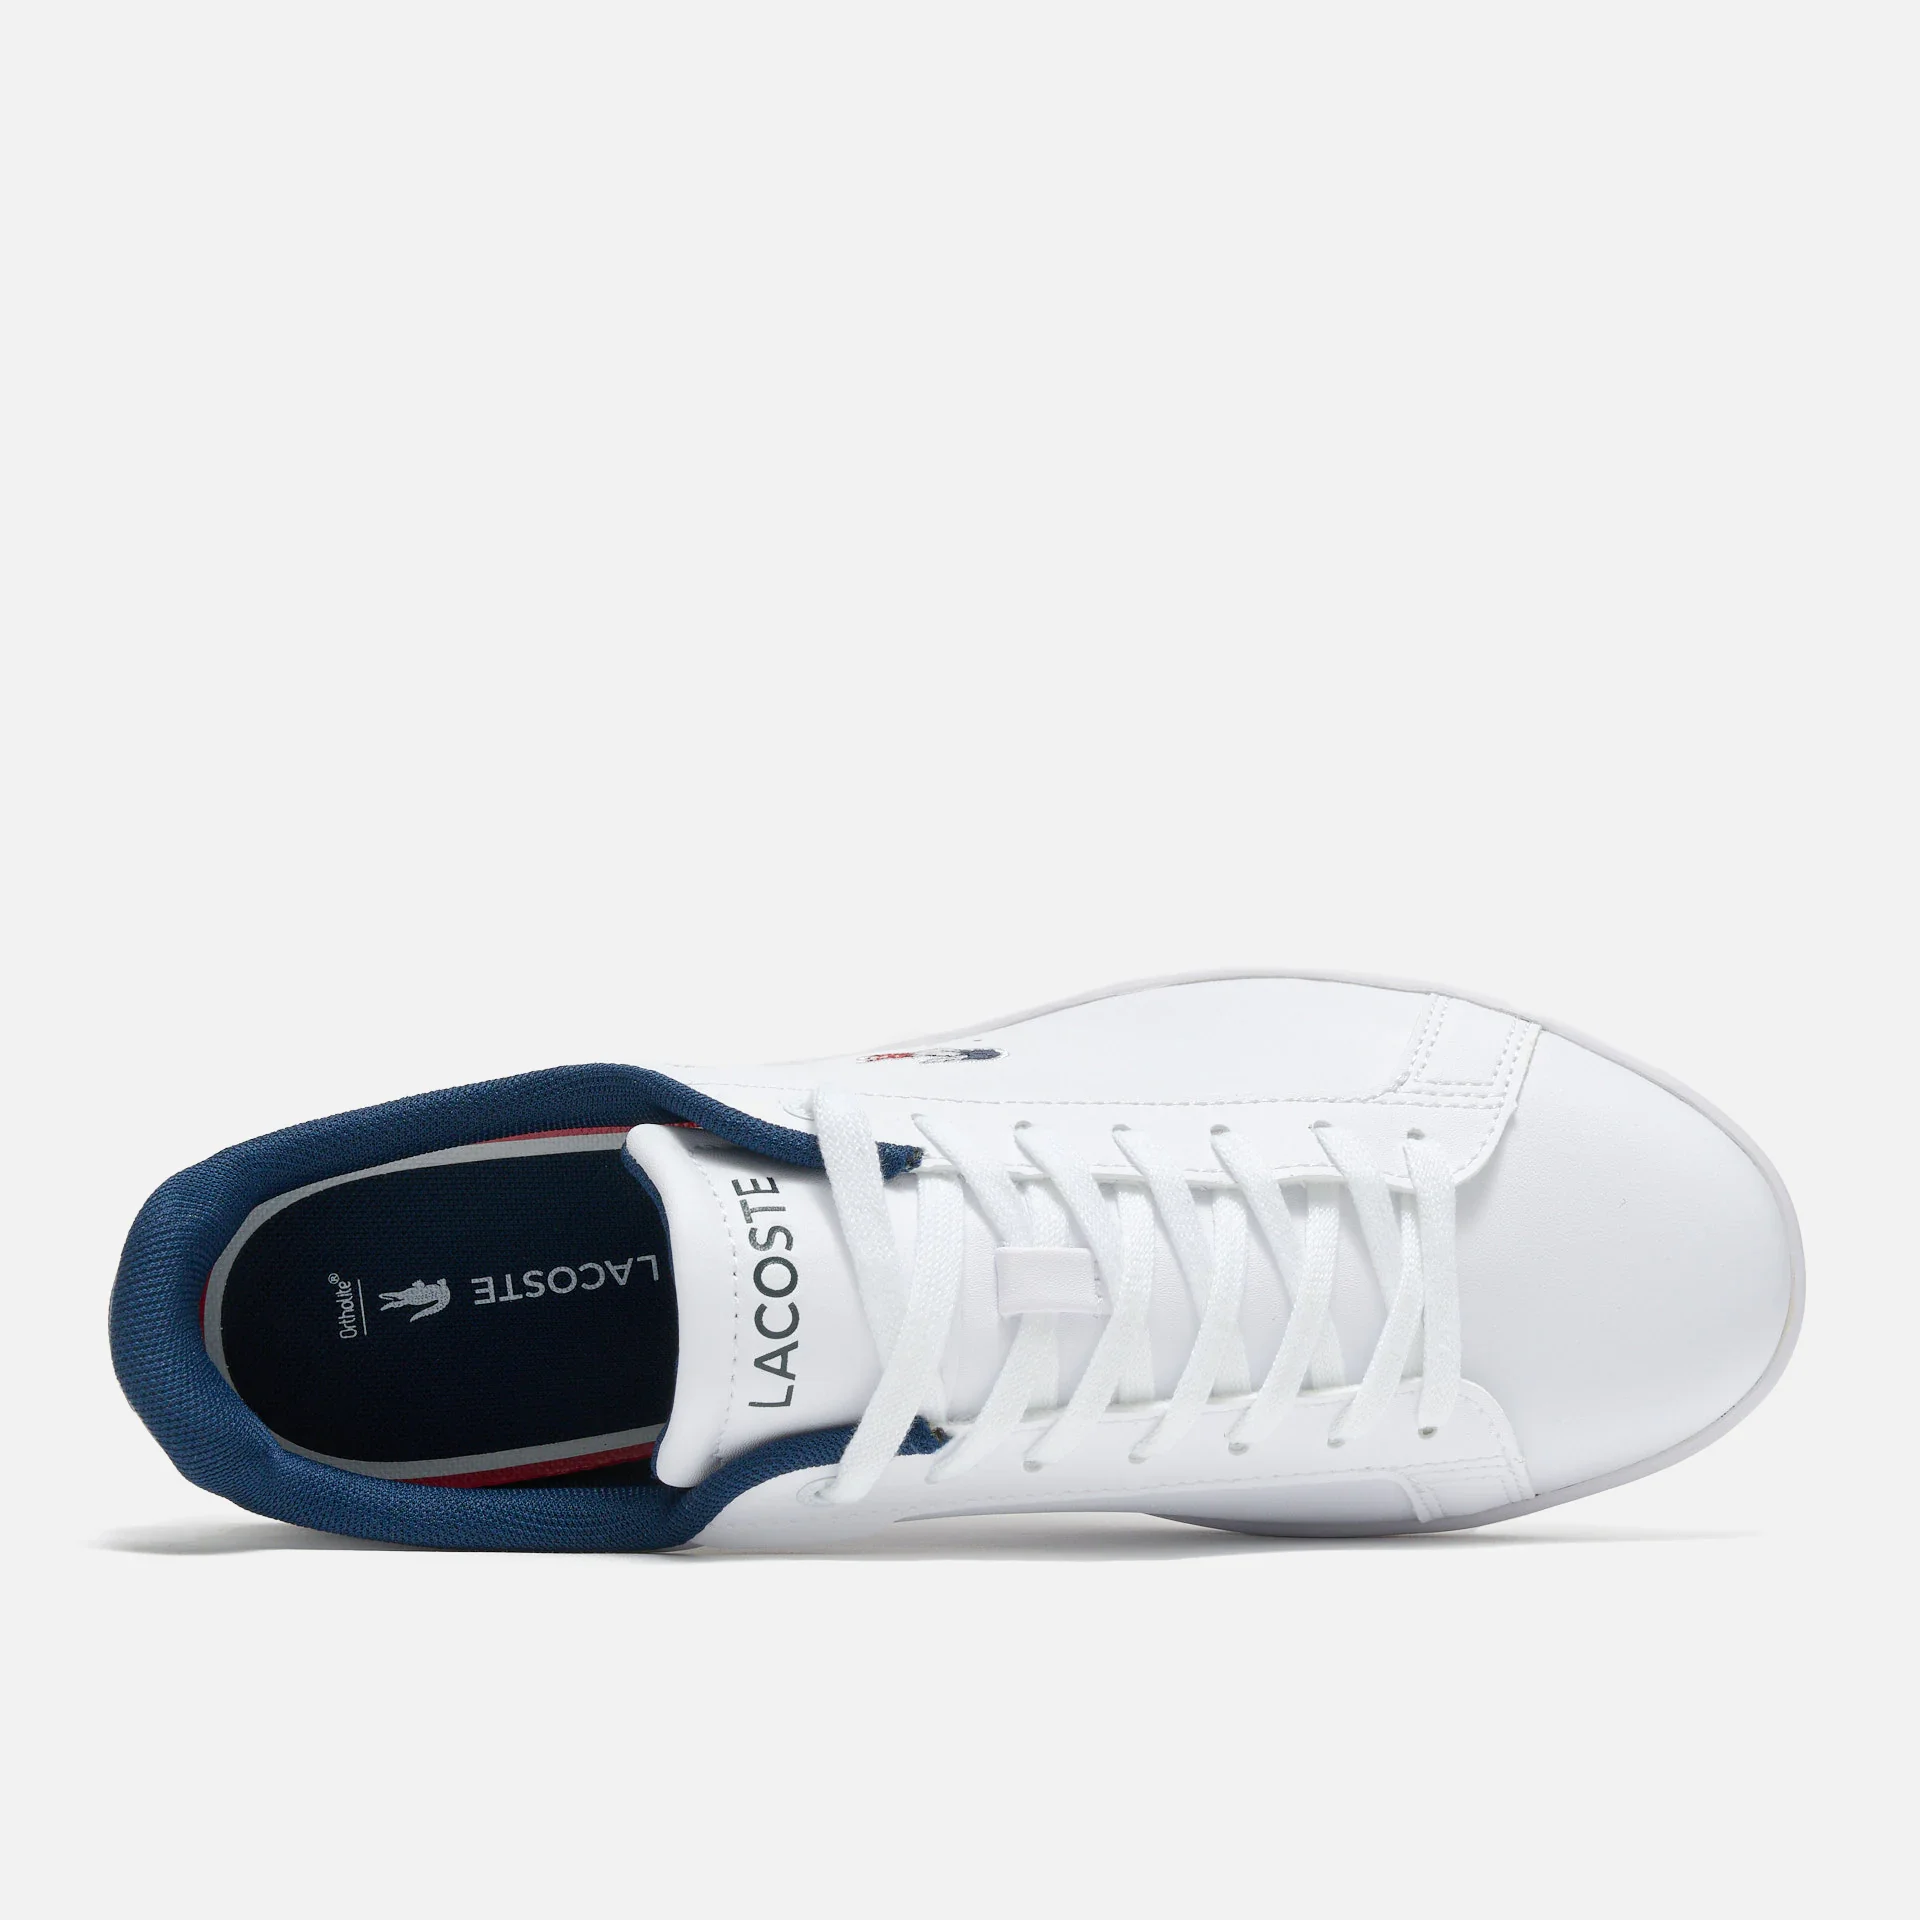 Lacoste Carnaby Pro Sneaker White/Navy/Red